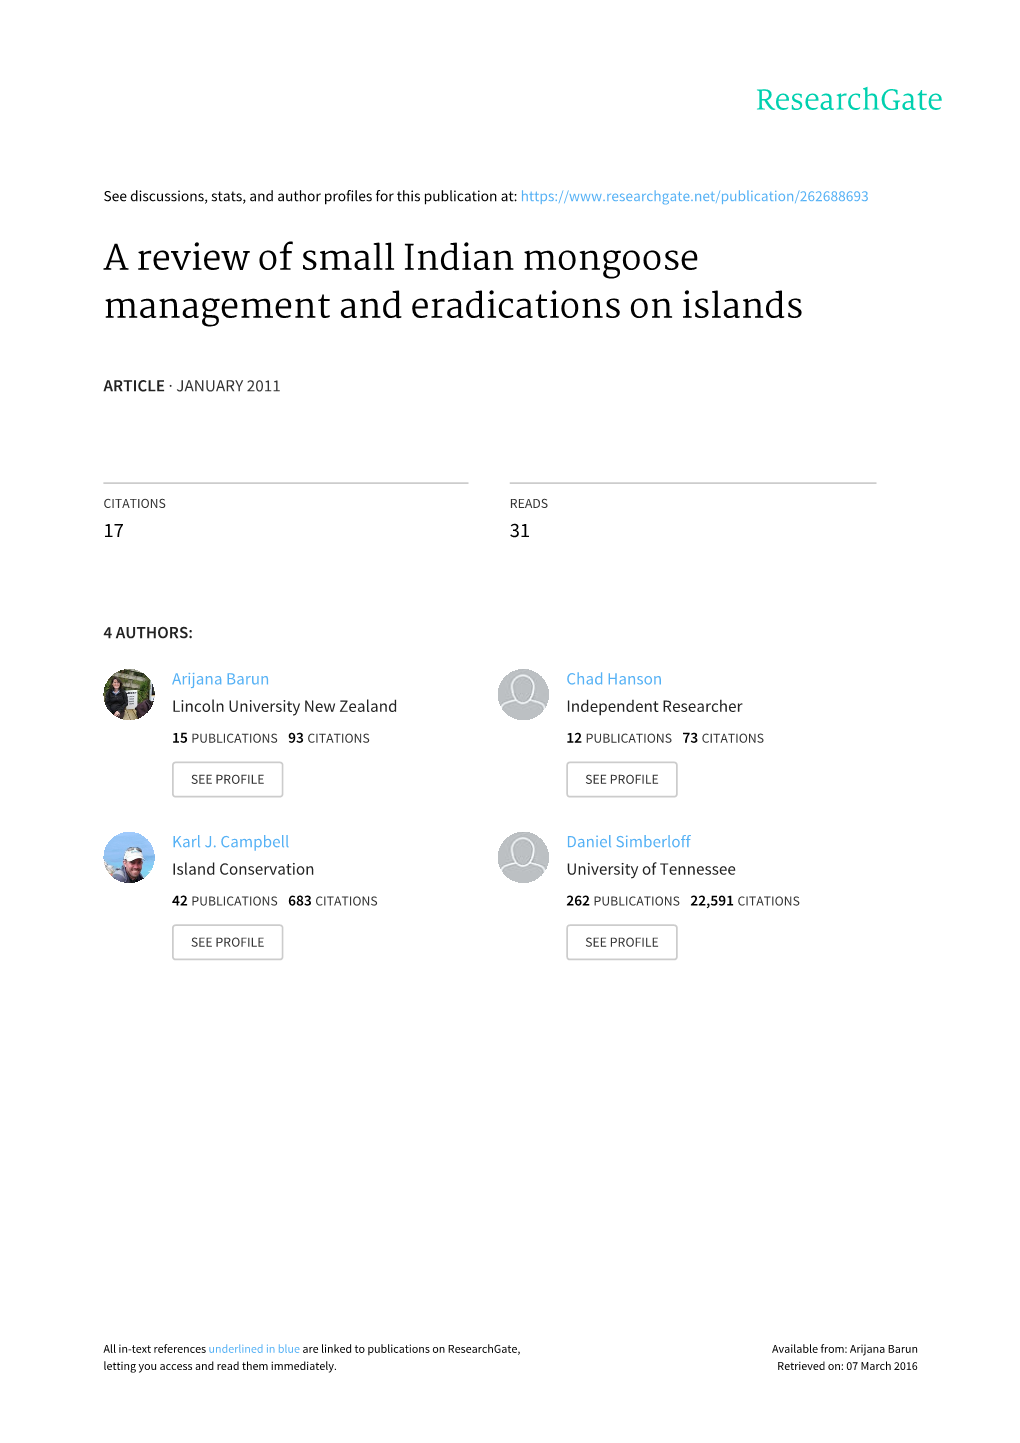 A Review of Small Indian Mongoose Management and Eradications on Islands